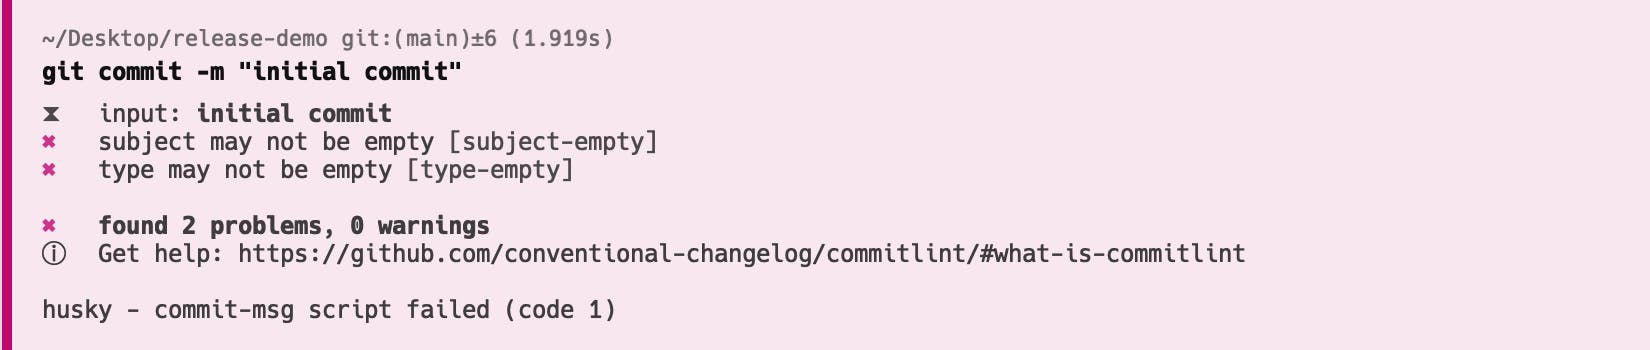 Screenshot showing the error message generated by Commitlint when a commit message does not adhere to the conventional commit format